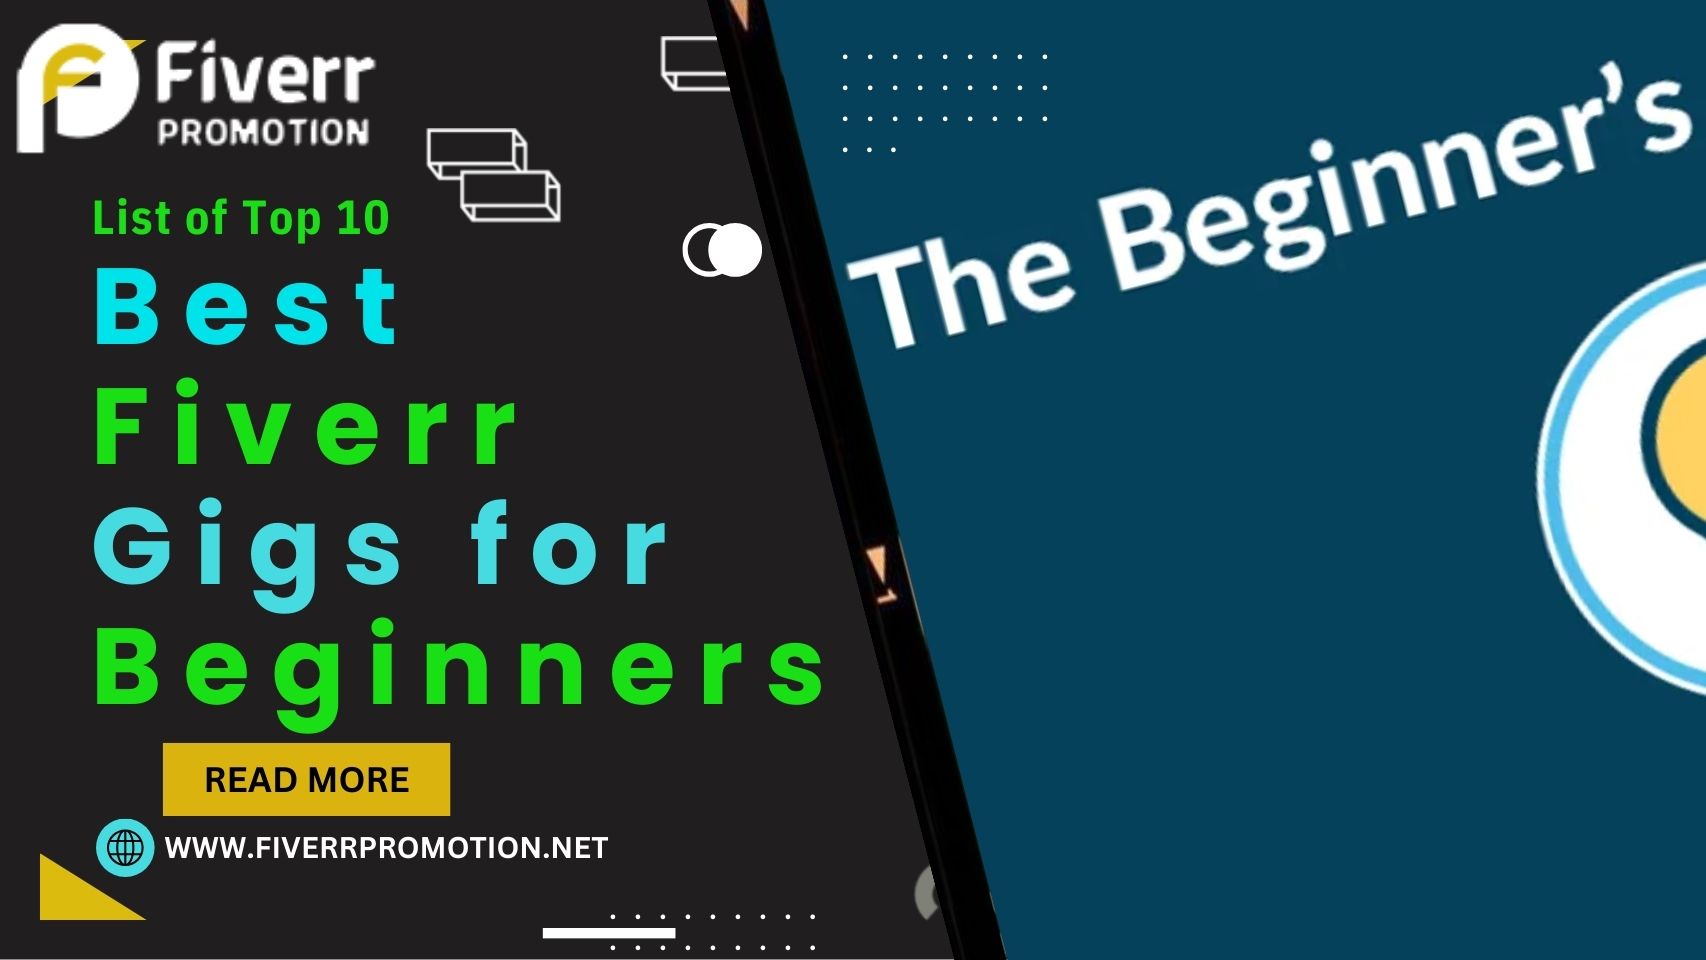 List of Top 10 Best Fiverr Gigs for Beginners